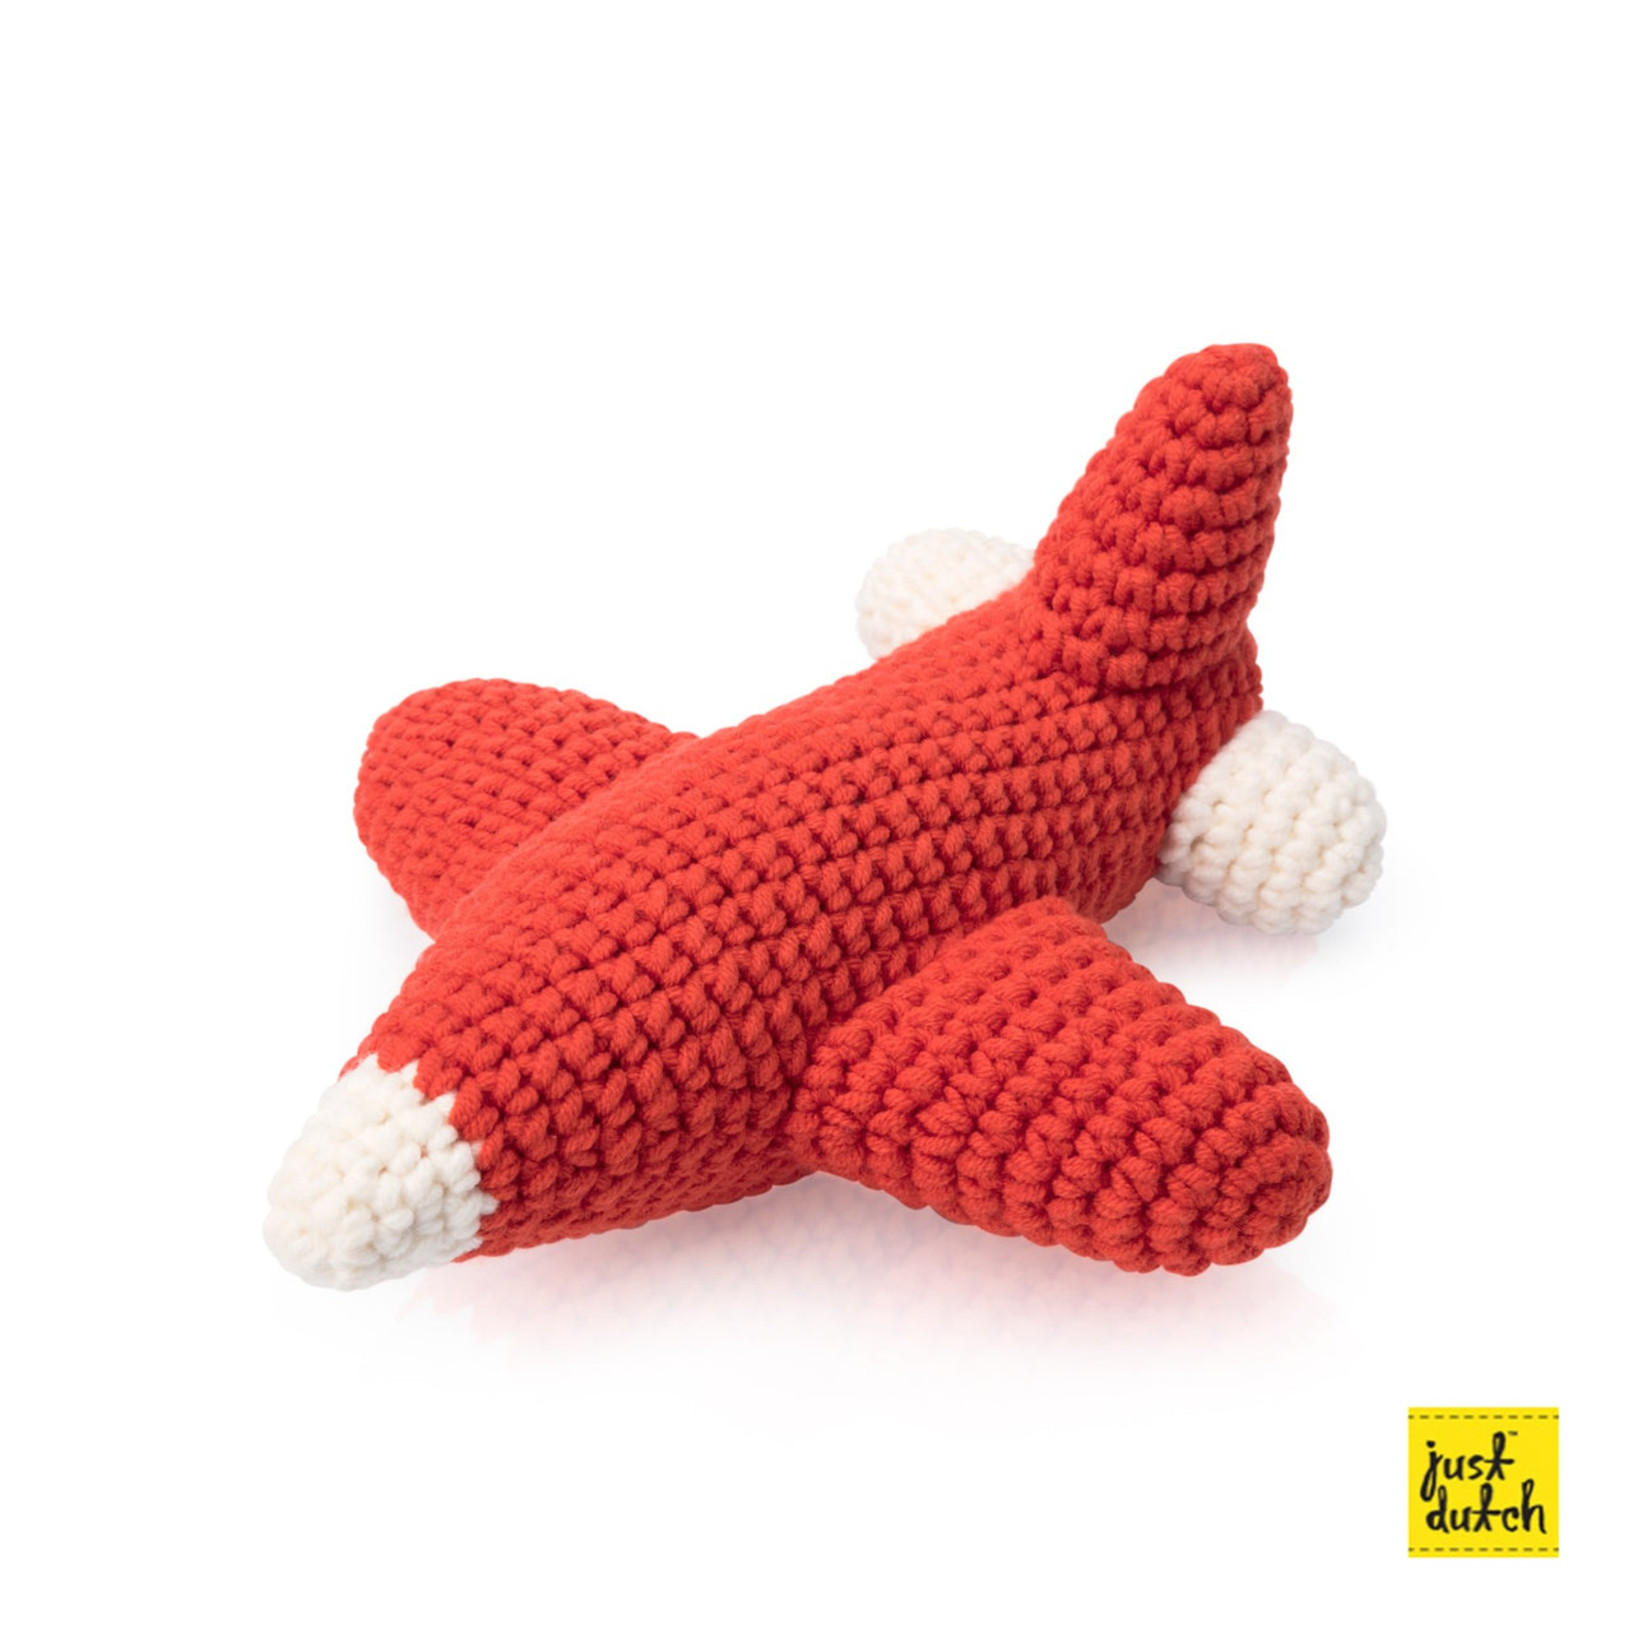 Just Dutch Crocheted Airplane Soft Toy